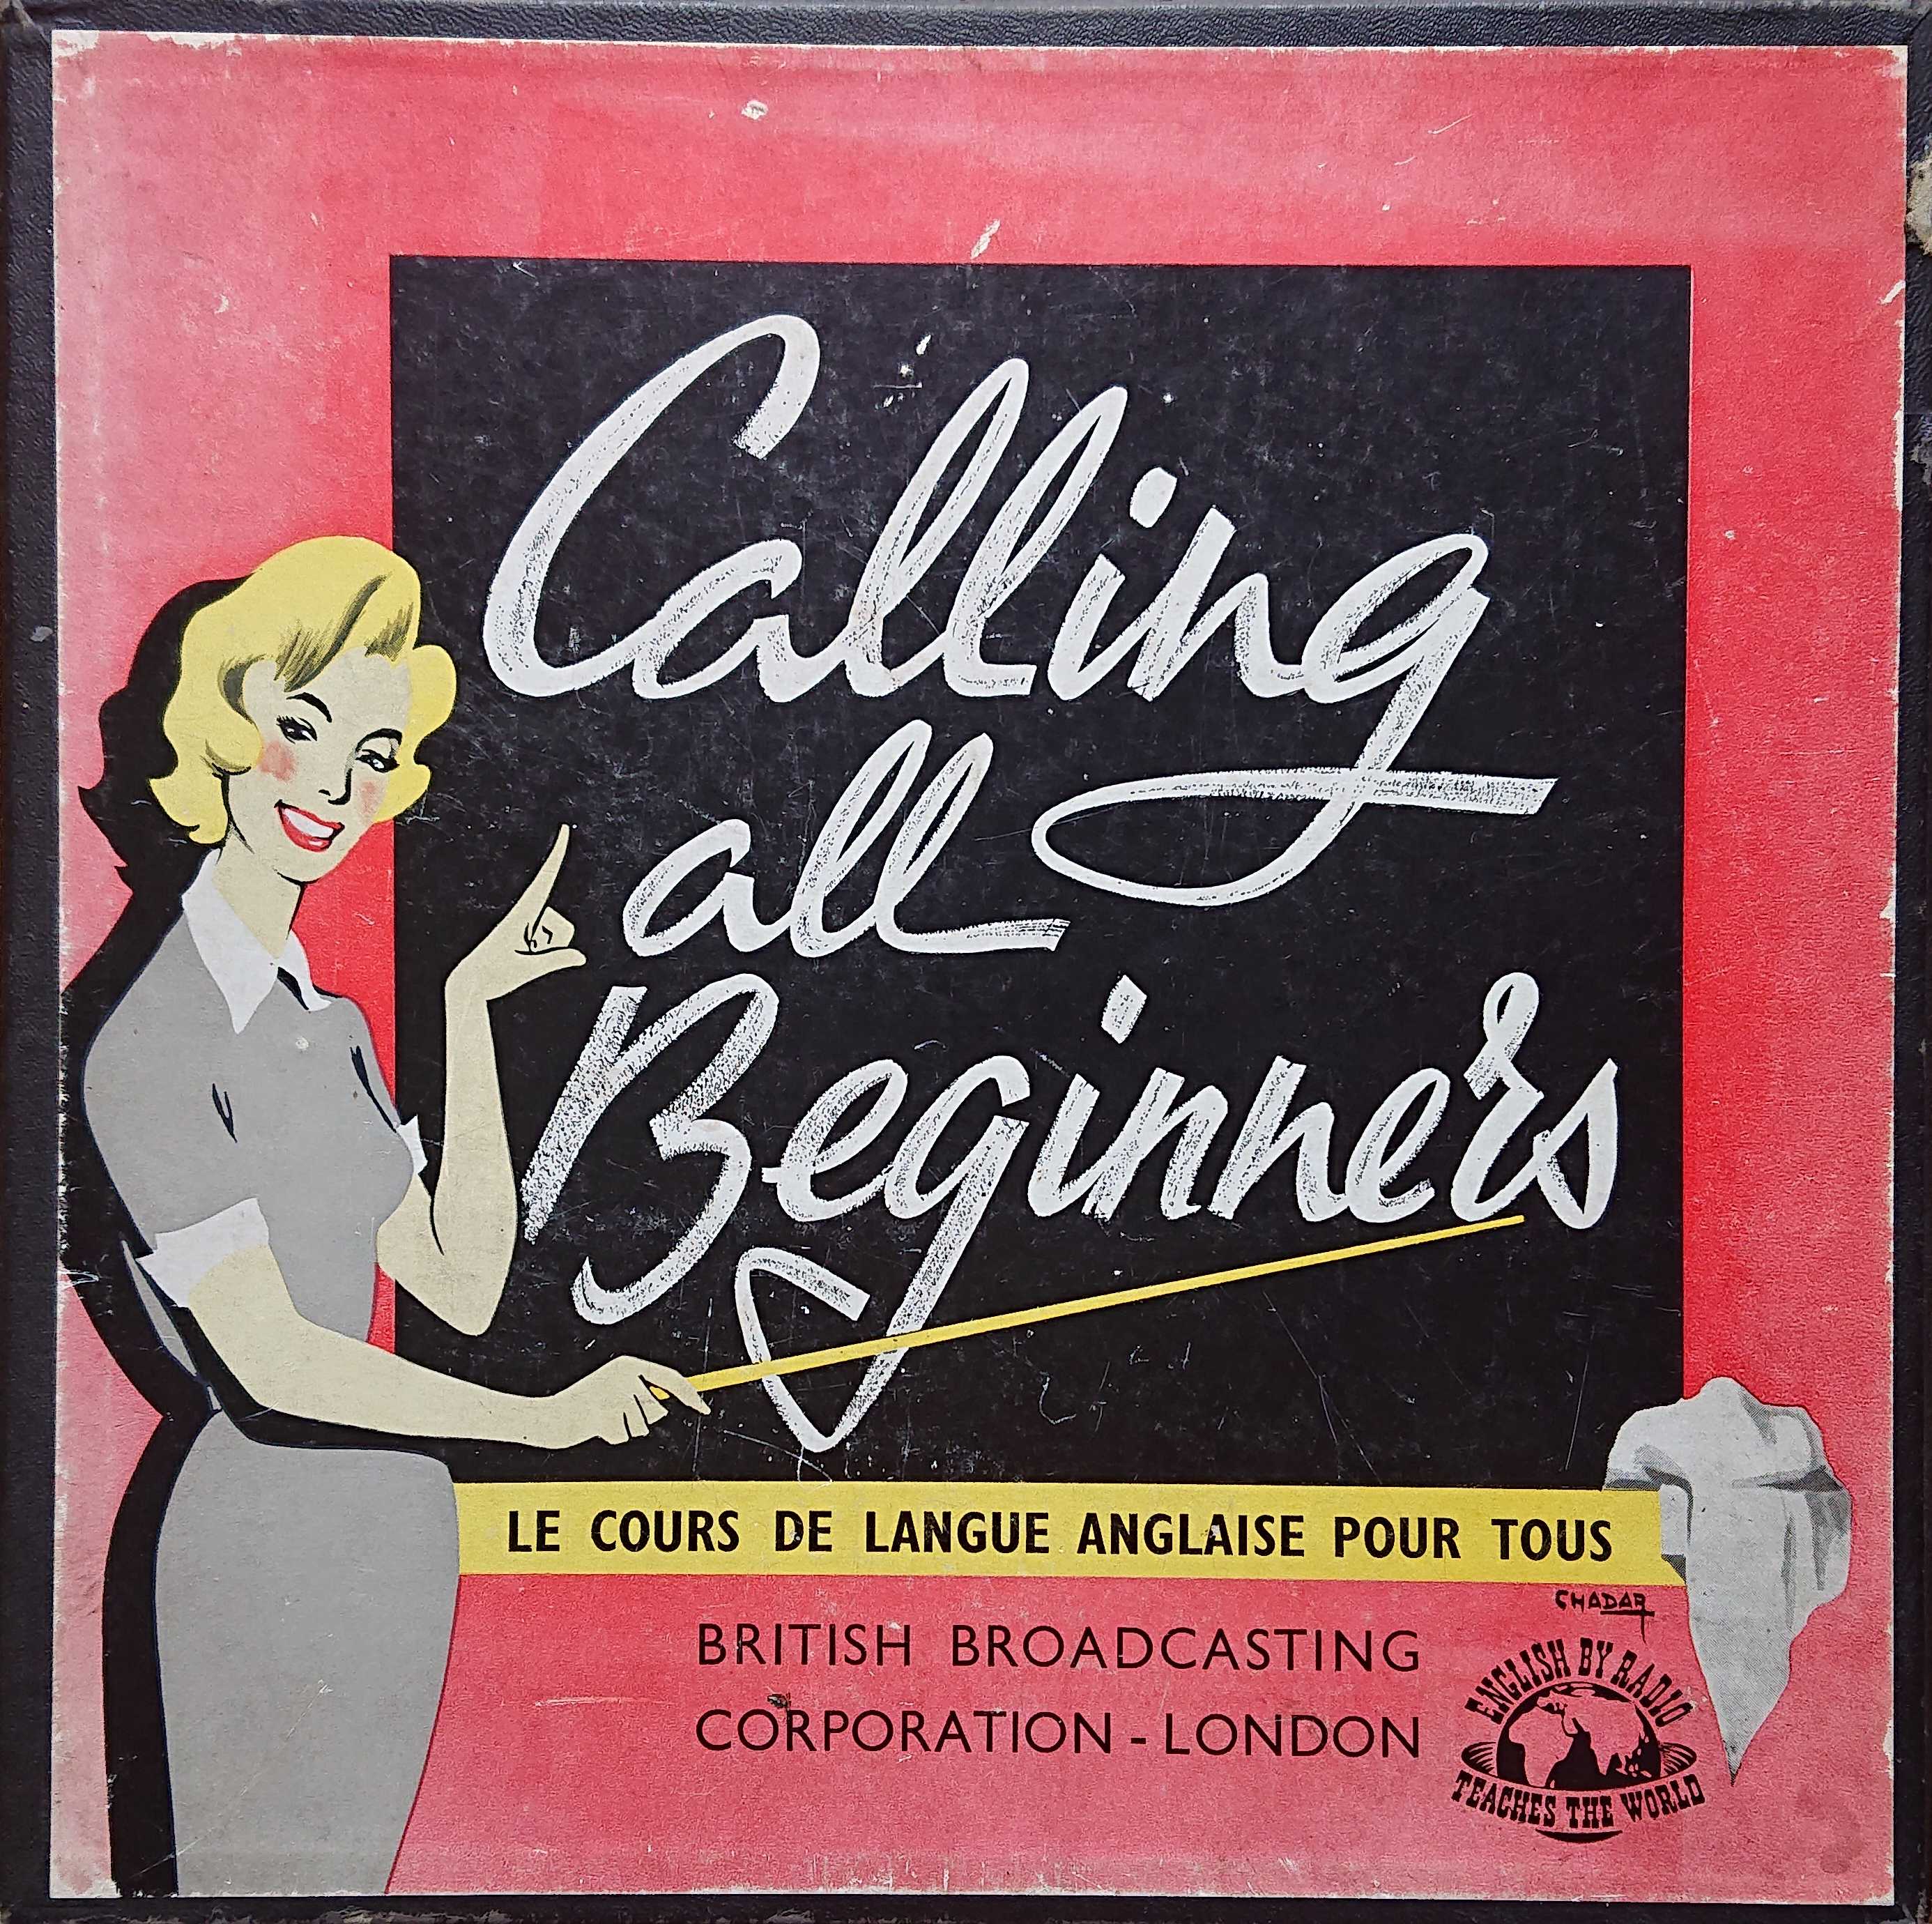 Picture of CAB 1-4 DU Calling all beginners by artist Various from the BBC records and Tapes library